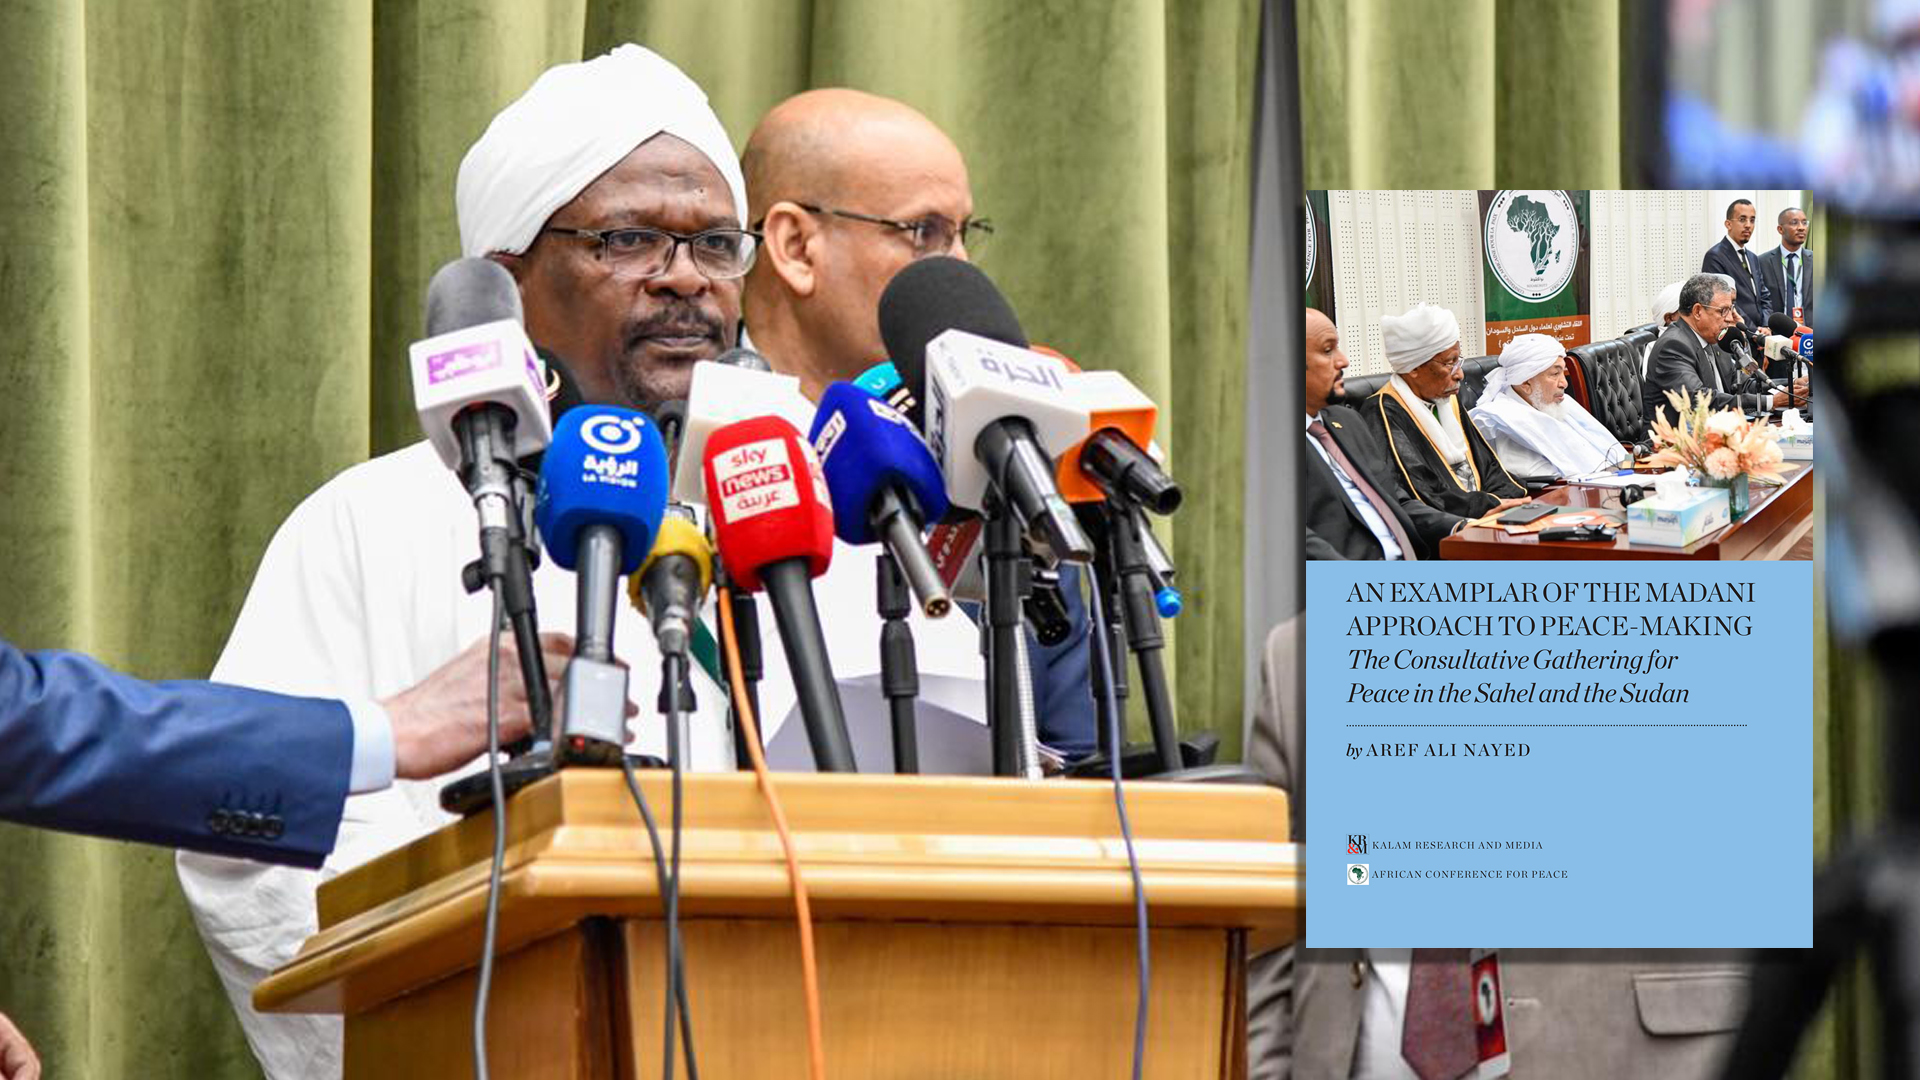 New Monograph on the Consultative Gathering for Peace in the Sahel and Sudan